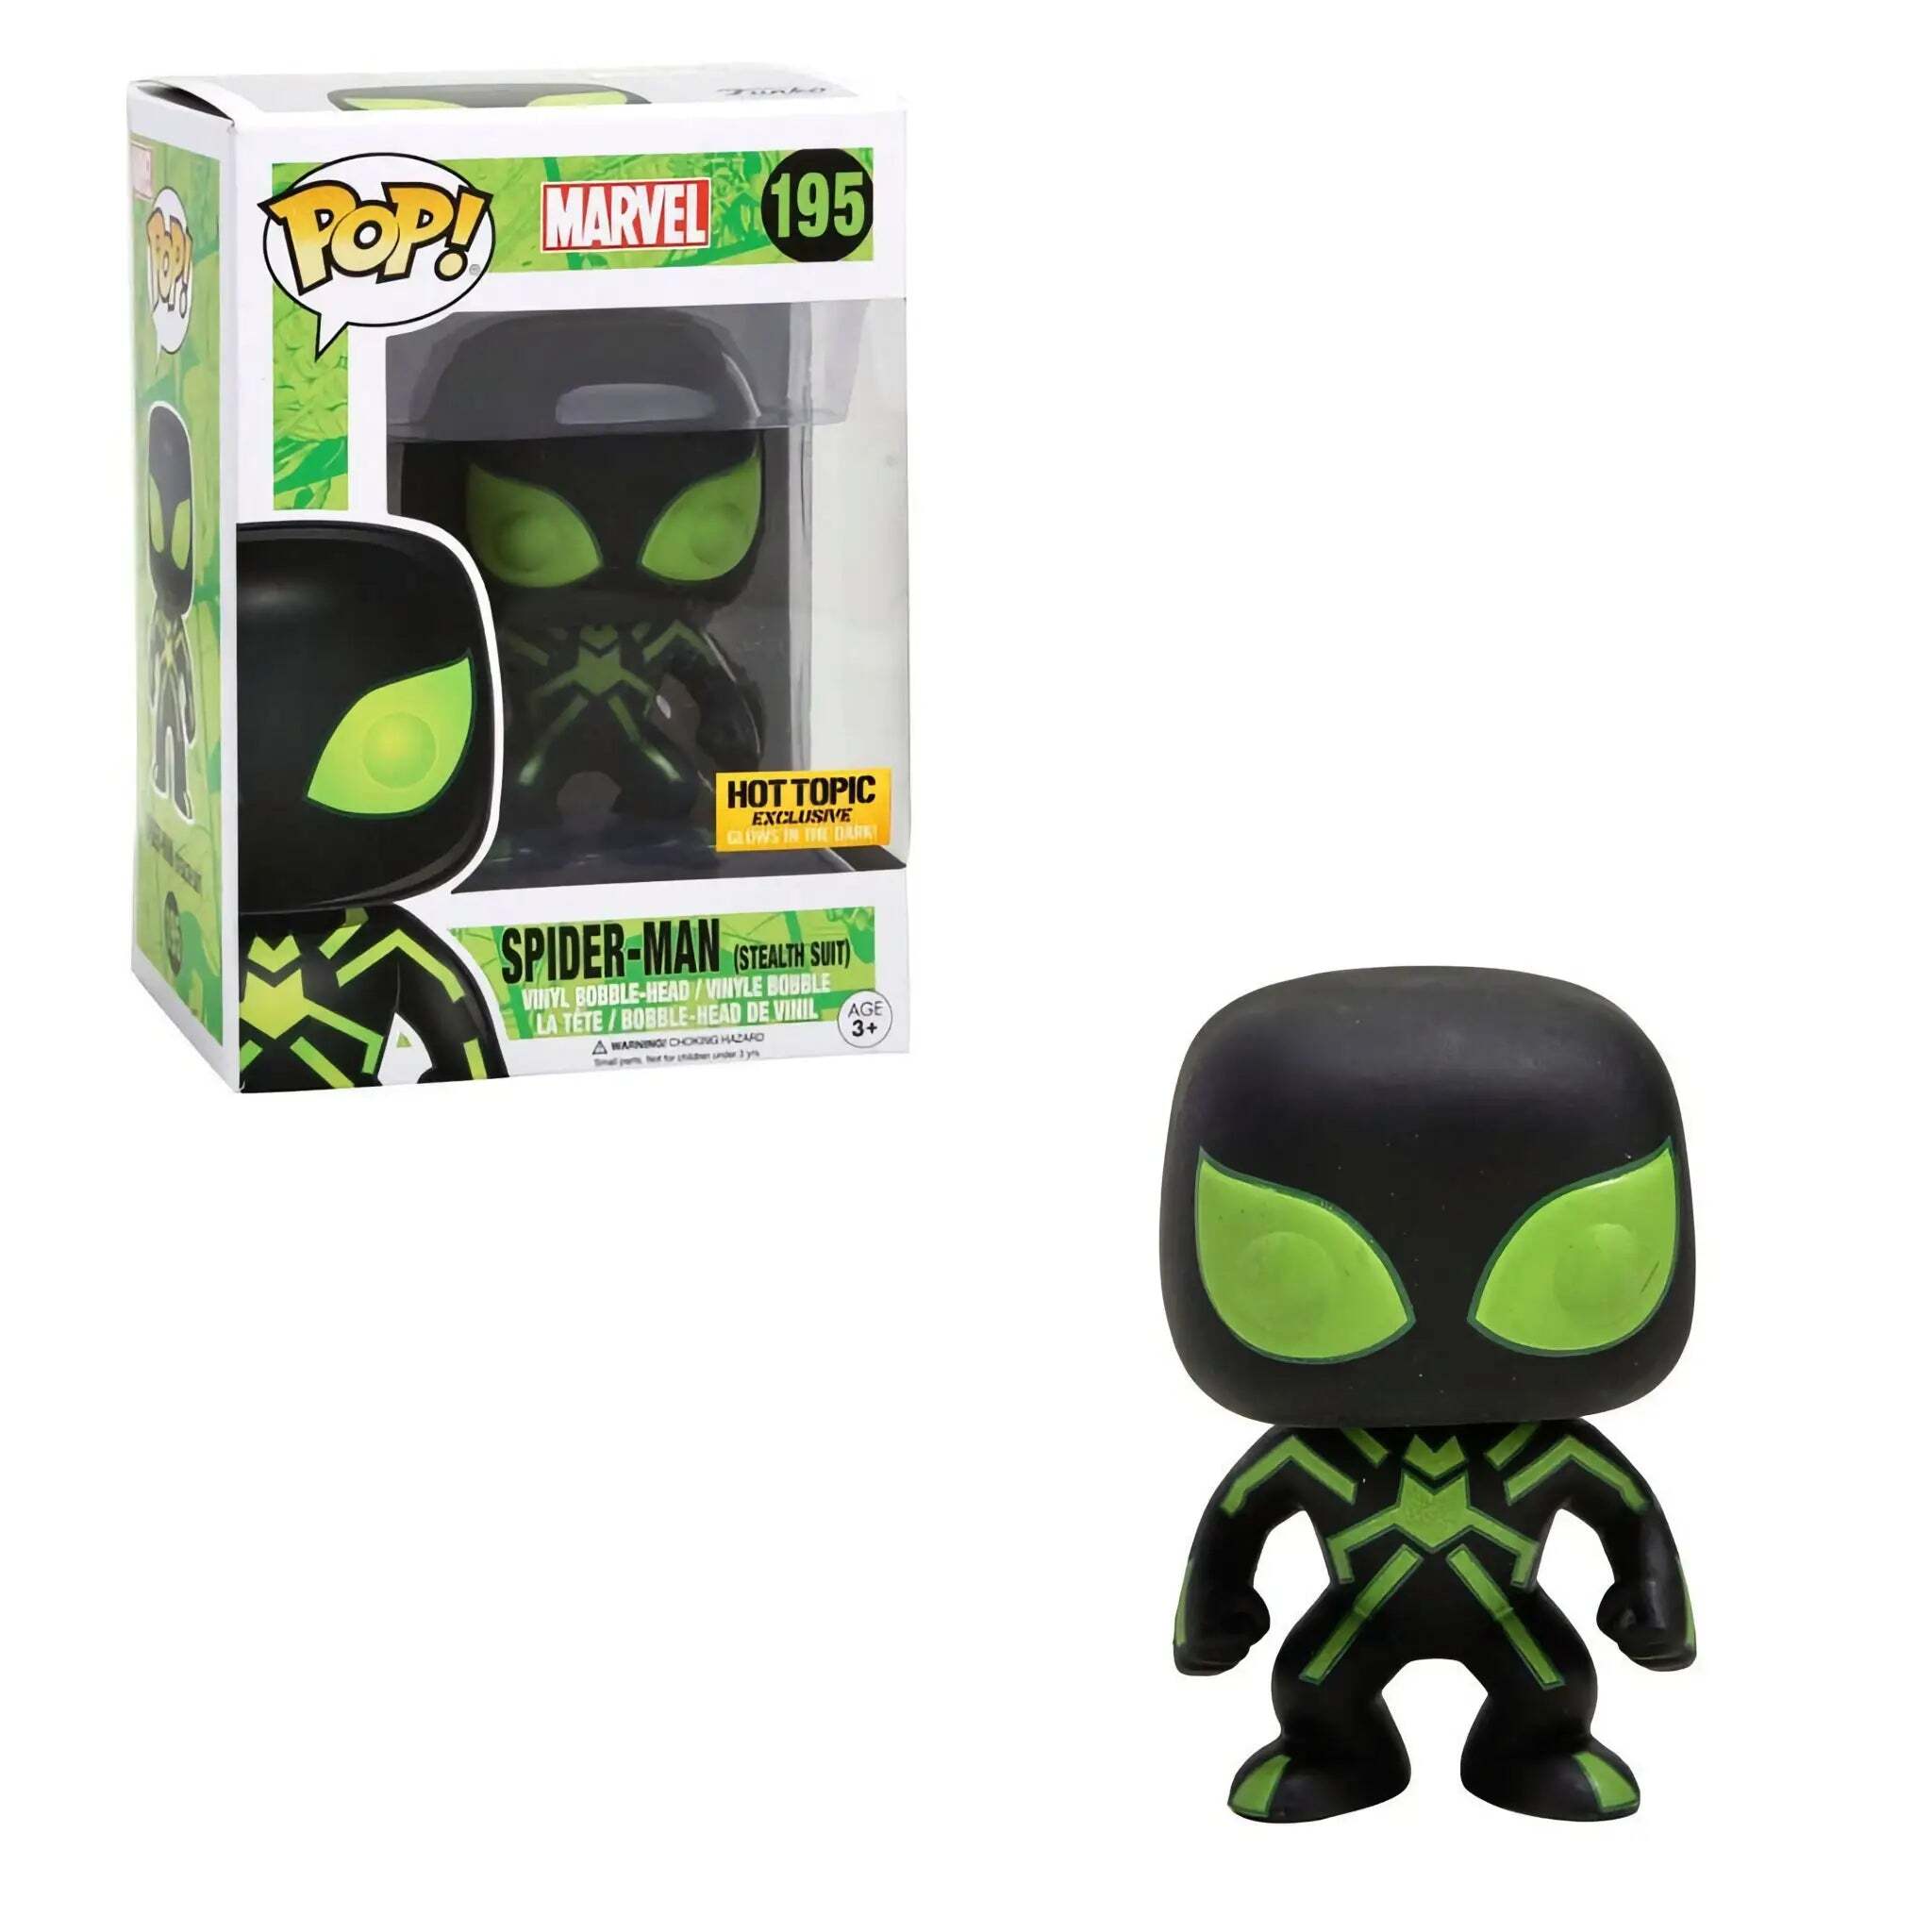 Spider-Man (Stealth Suit) Funko Pop! HOT TOPIC EXCLUSIVE